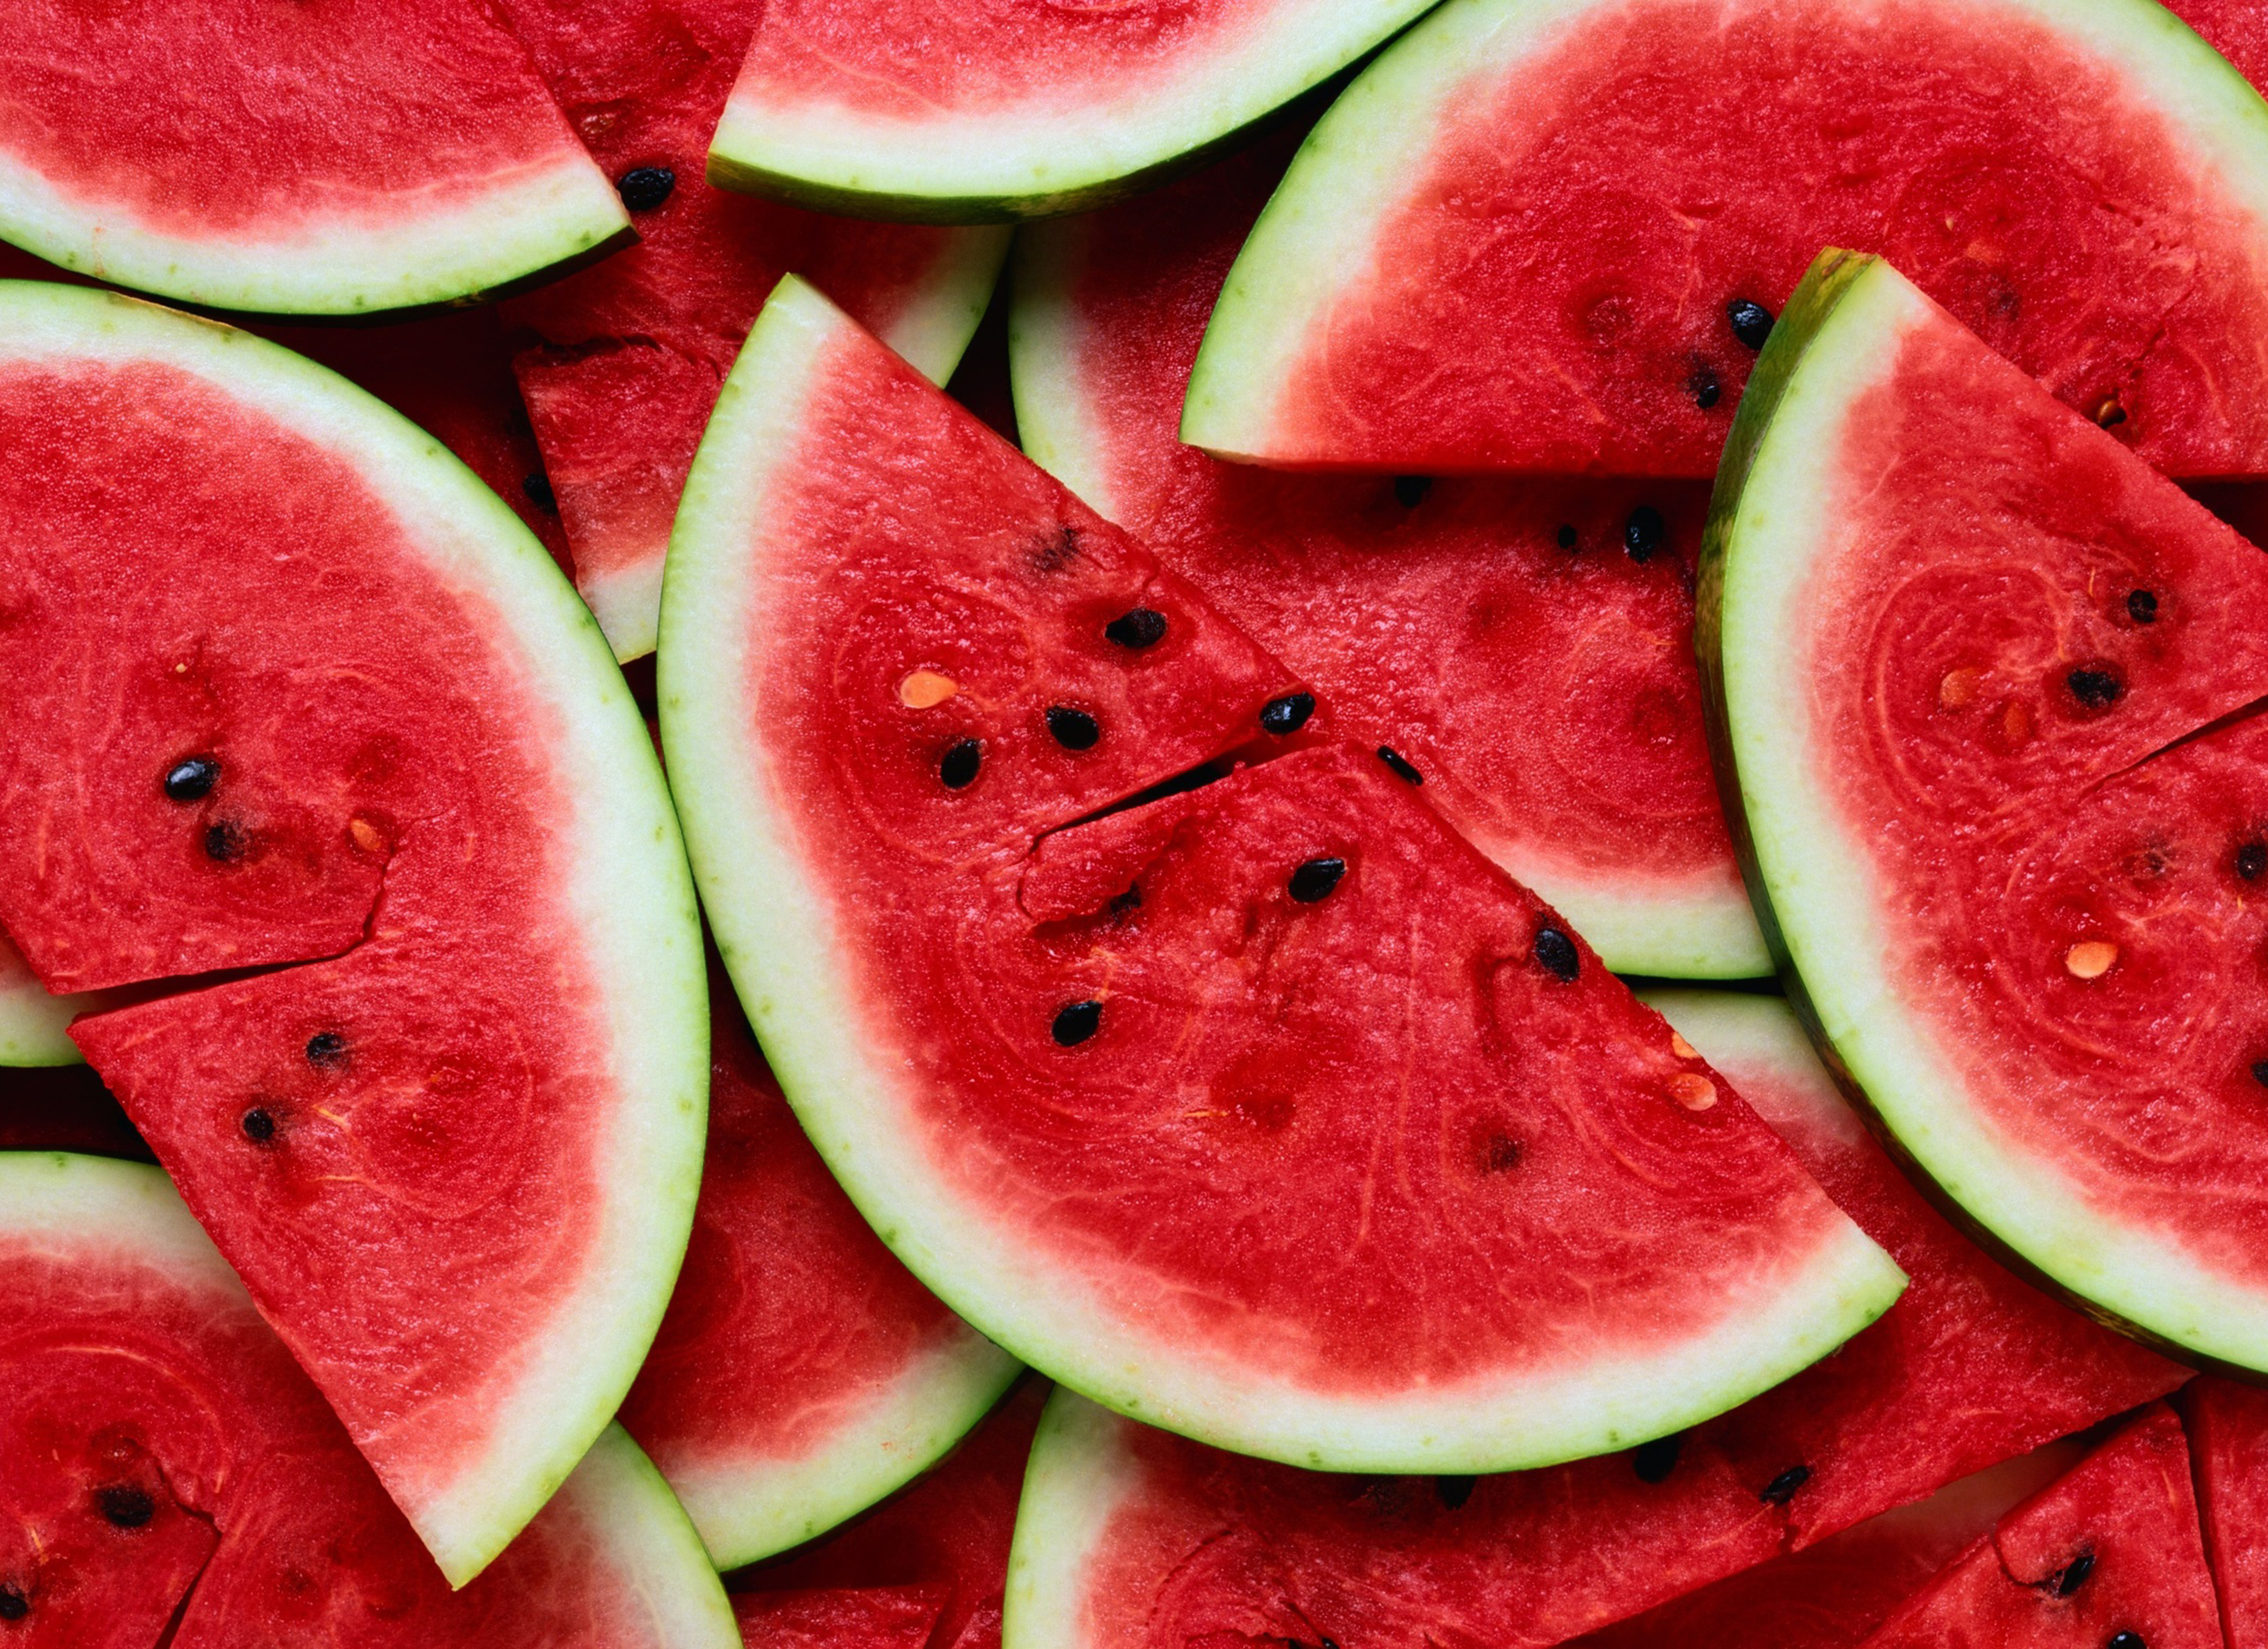 125538 Screensavers and Wallpapers Berry for phone. Download food, red, berry, watermelon, ripe, juicy pictures for free